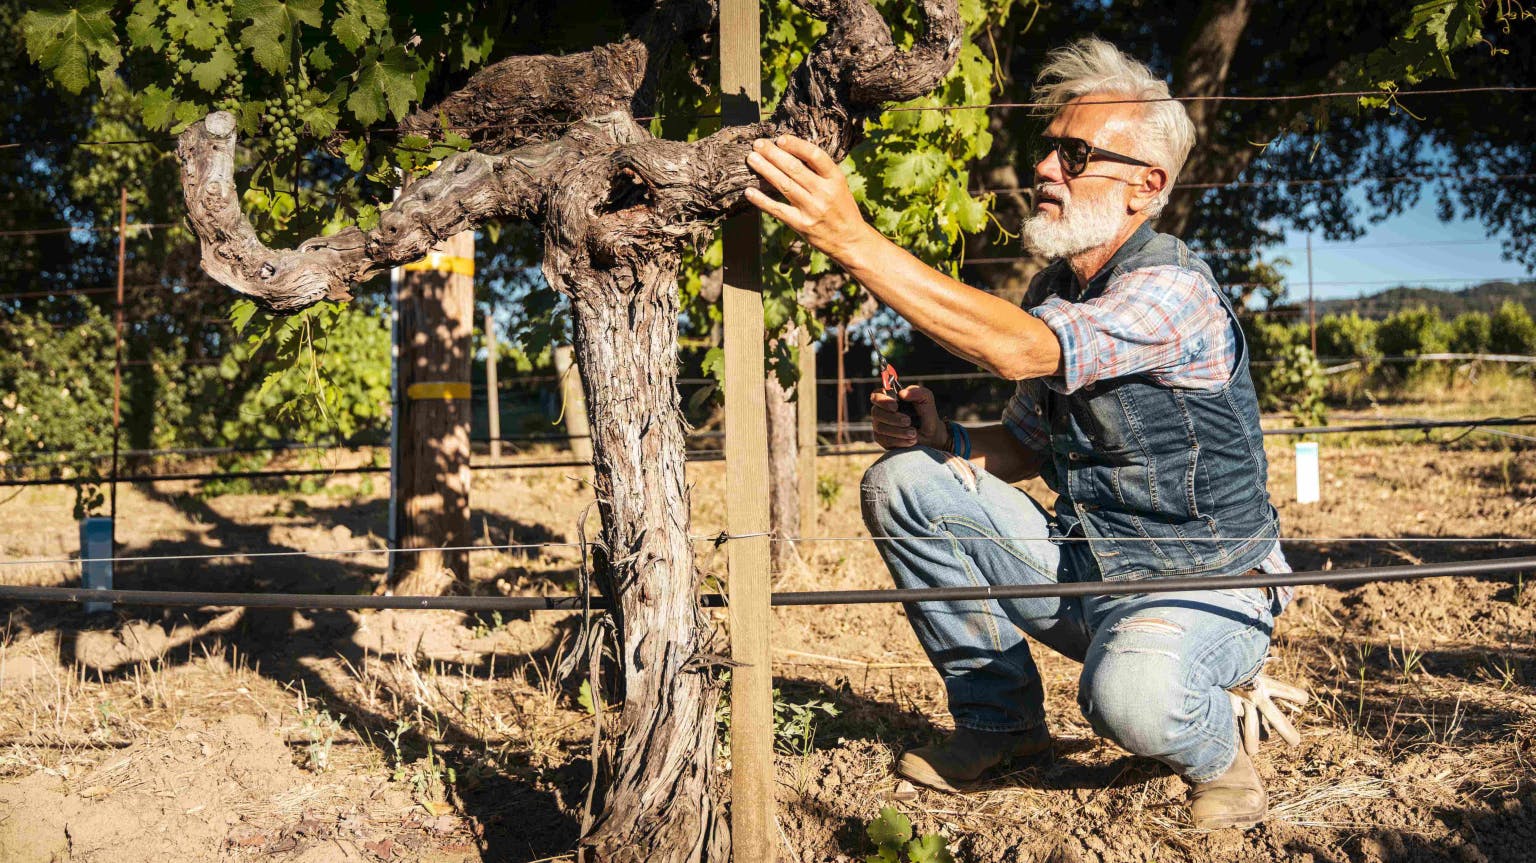 Marco Simonit on why old vines matter